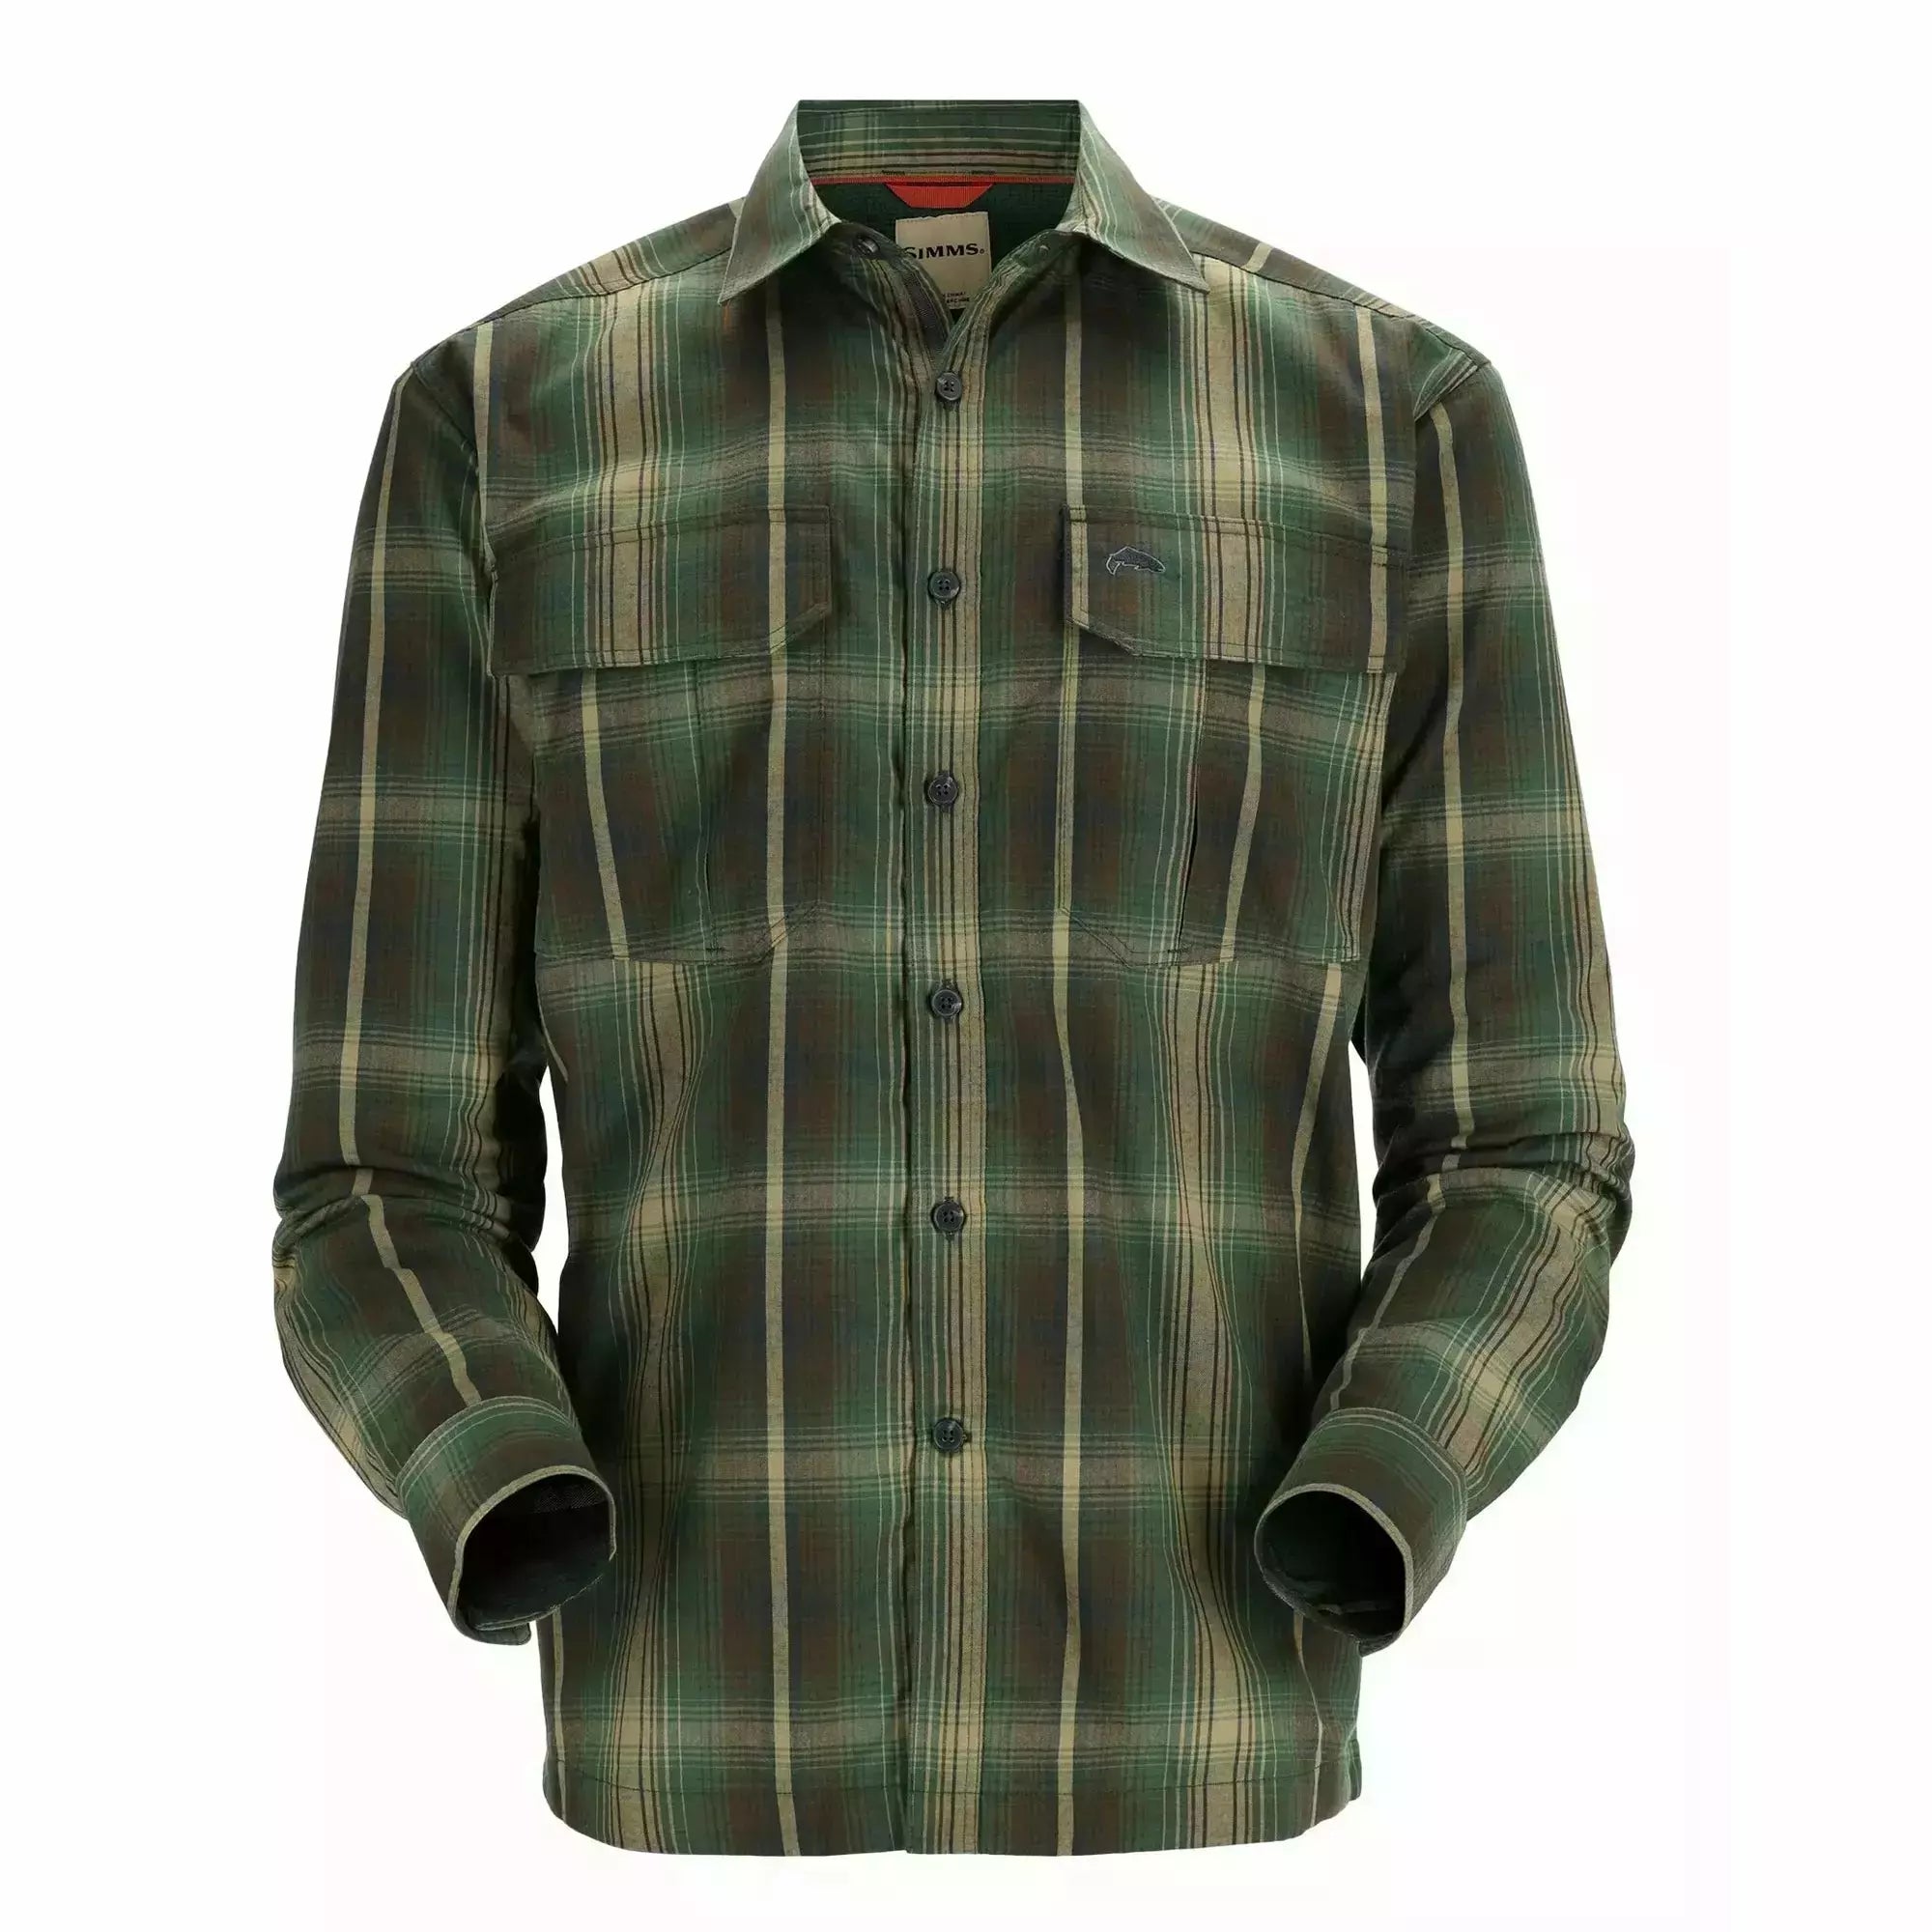 Simms Men's ColdWeather Shirt - Forest Hickory Plaid